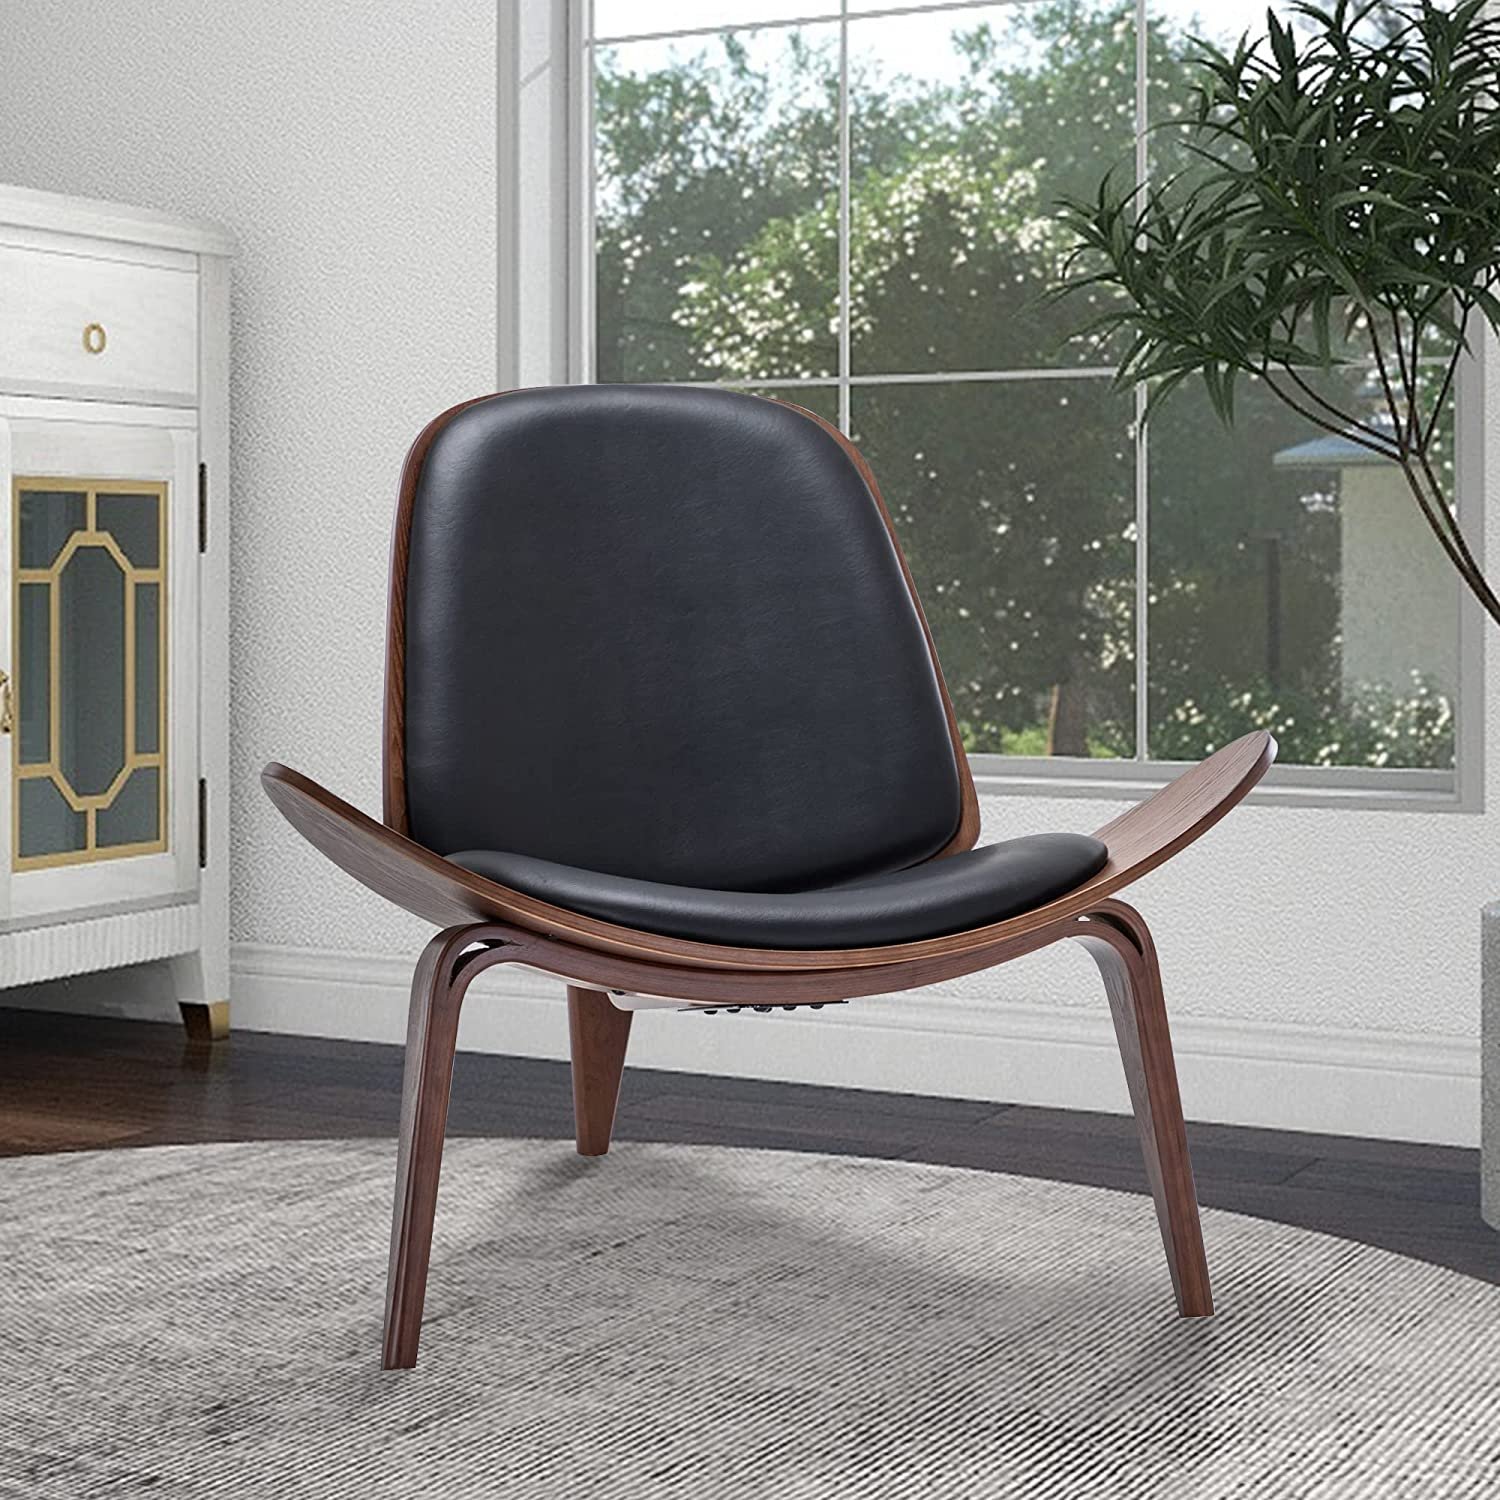 BELLEZE Living Room Chair, Faux Leather Accent Chair